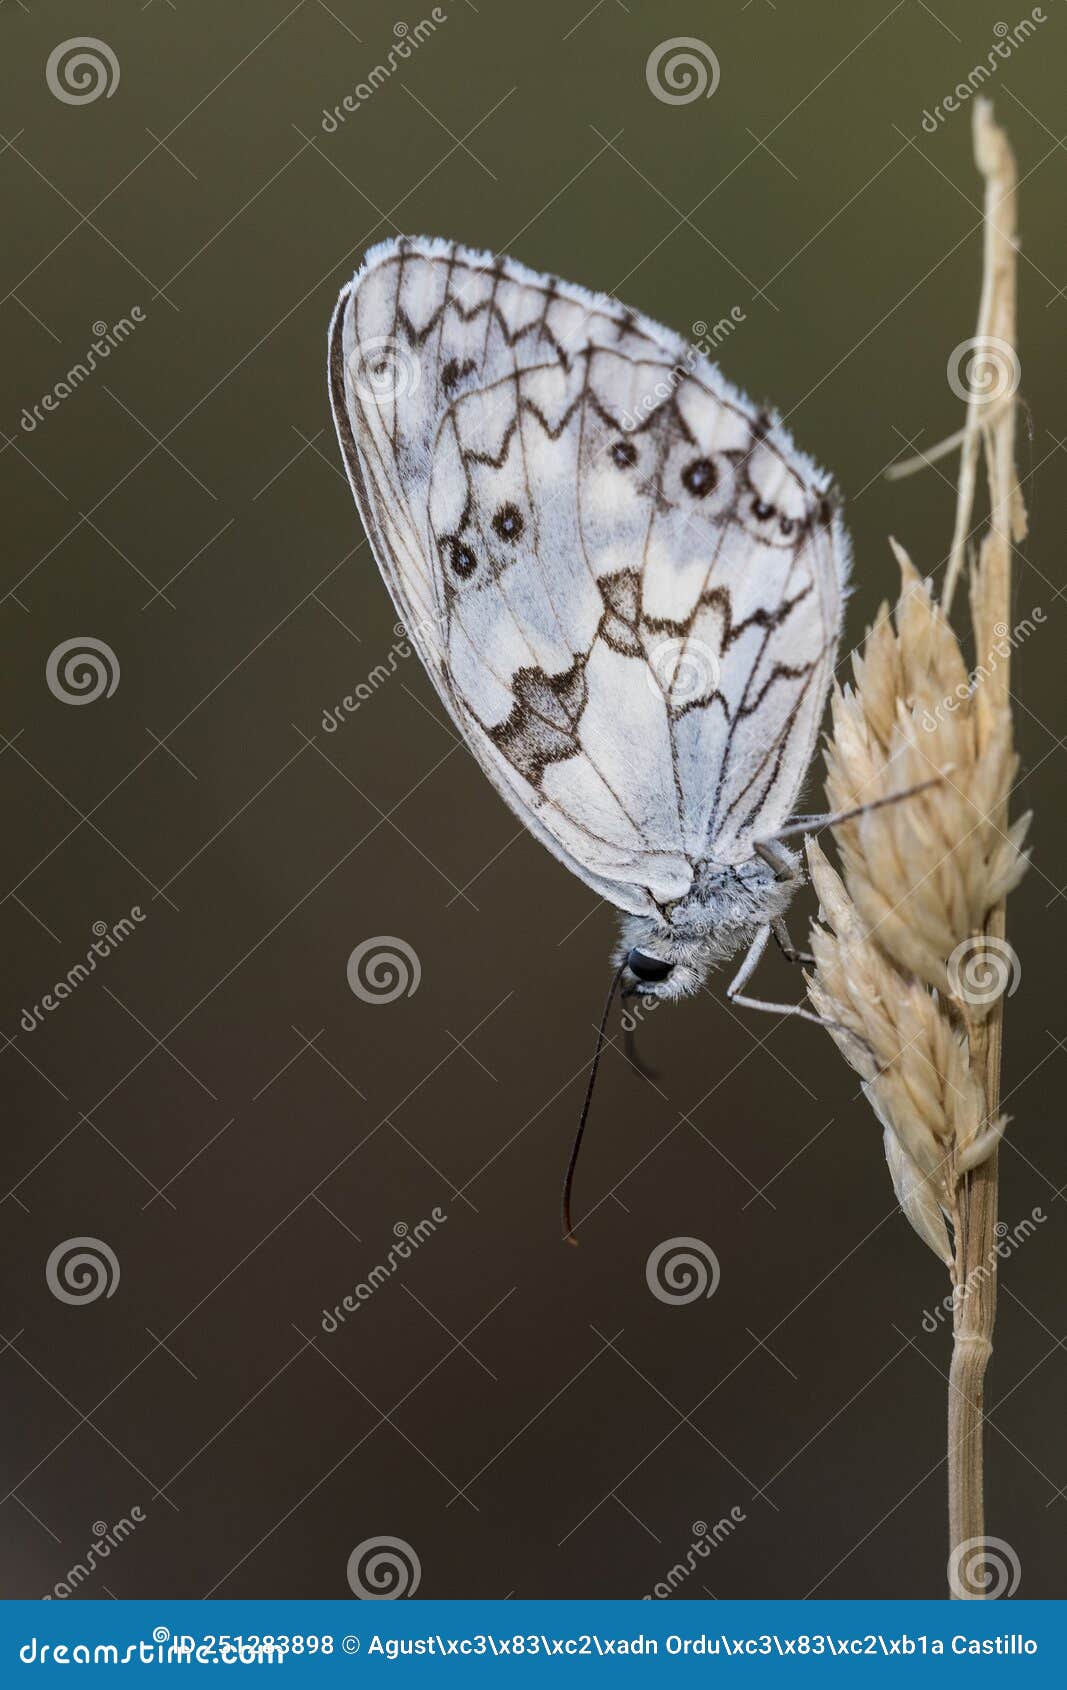 melanargia lachesis or iberian medioluto, is a species of lepidoptera ditrisio of the family nymphalidae